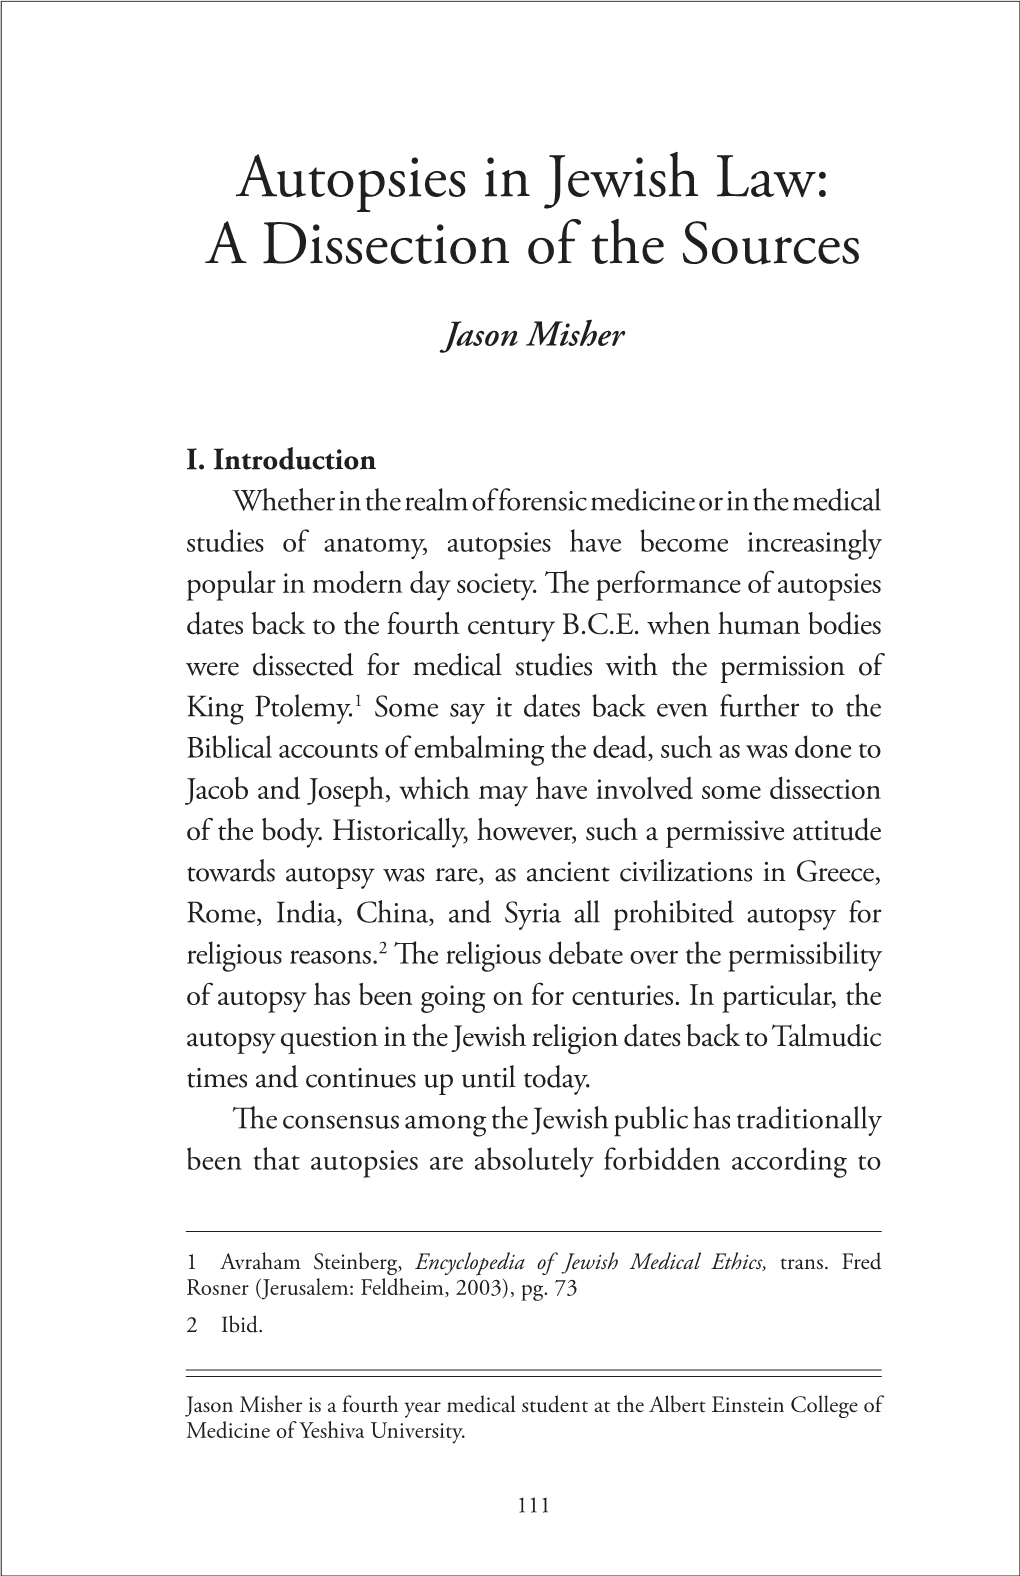 Autopsies in Jewish Law: a Dissection of the Sources